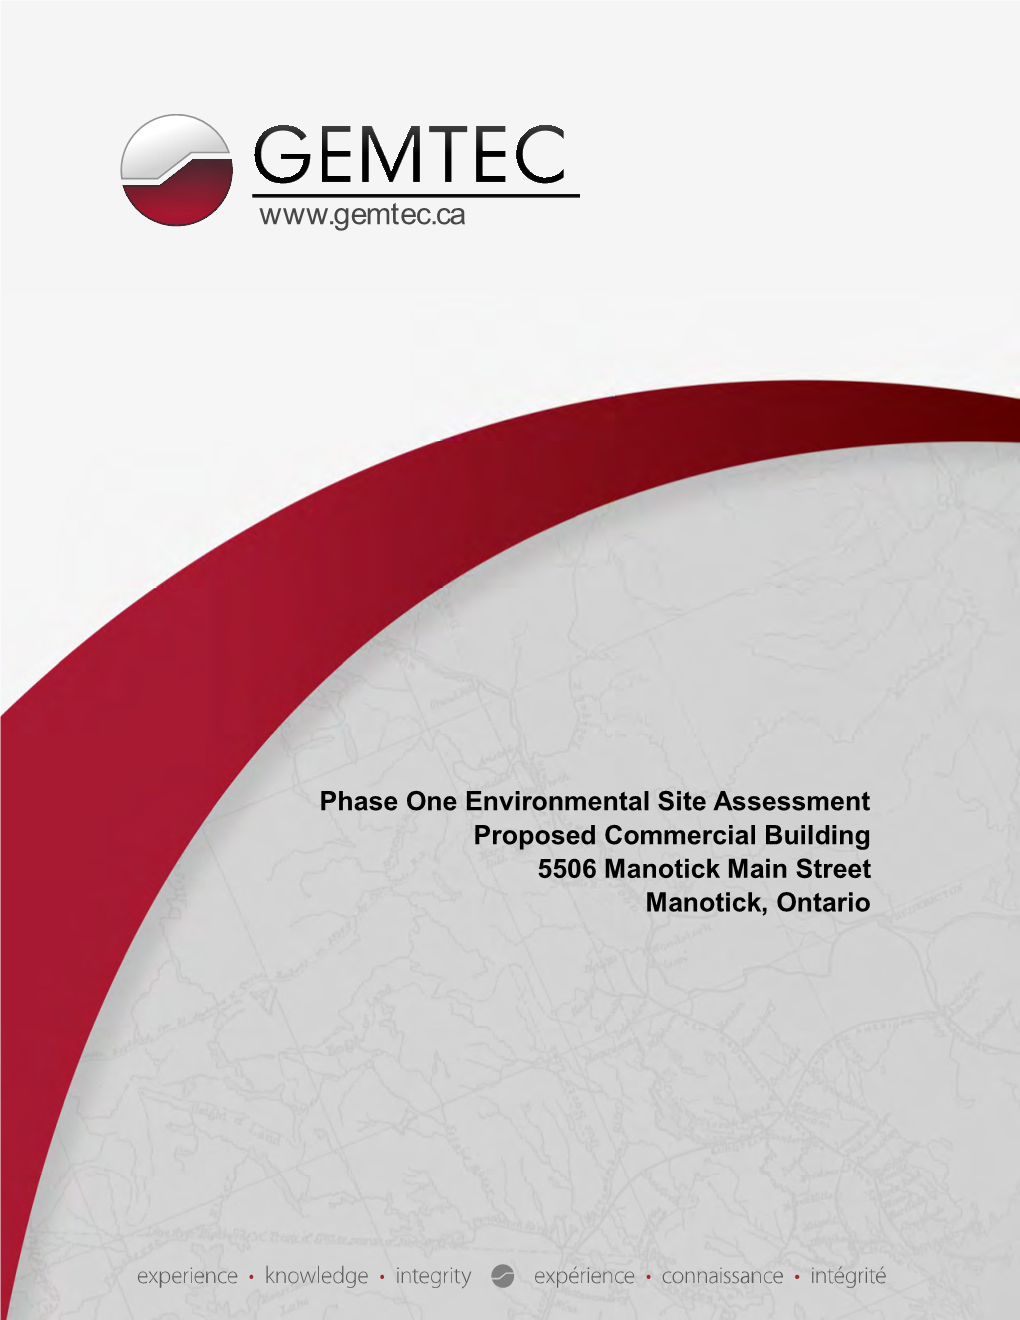 Phase One Environmental Site Assessment Proposed Commercial Building 5506 Manotick Main Street Manotick, Ontario